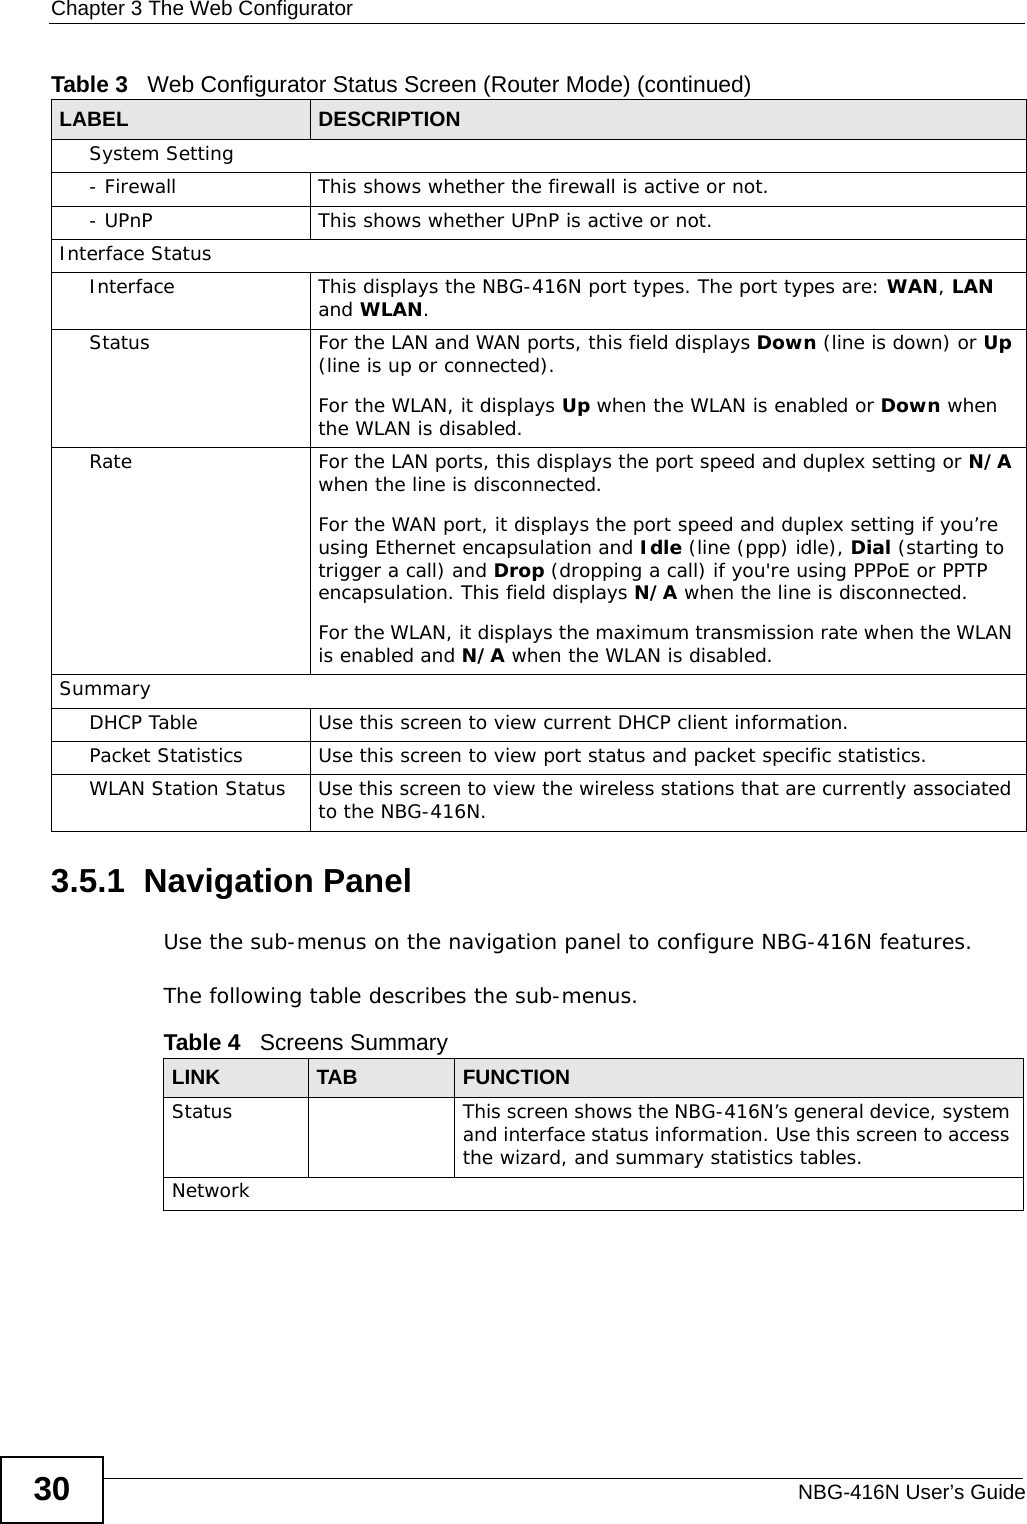 Chapter 3 The Web ConfiguratorNBG-416N User’s Guide303.5.1  Navigation PanelUse the sub-menus on the navigation panel to configure NBG-416N features. The following table describes the sub-menus.System Setting- Firewall This shows whether the firewall is active or not.- UPnP This shows whether UPnP is active or not.Interface StatusInterface This displays the NBG-416N port types. The port types are: WAN, LAN and WLAN.Status For the LAN and WAN ports, this field displays Down (line is down) or Up (line is up or connected).For the WLAN, it displays Up when the WLAN is enabled or Down when the WLAN is disabled.Rate For the LAN ports, this displays the port speed and duplex setting or N/A when the line is disconnected.For the WAN port, it displays the port speed and duplex setting if you’re using Ethernet encapsulation and Idle (line (ppp) idle), Dial (starting to trigger a call) and Drop (dropping a call) if you&apos;re using PPPoE or PPTP encapsulation. This field displays N/A when the line is disconnected.For the WLAN, it displays the maximum transmission rate when the WLAN is enabled and N/A when the WLAN is disabled.SummaryDHCP Table Use this screen to view current DHCP client information.Packet Statistics Use this screen to view port status and packet specific statistics.WLAN Station Status Use this screen to view the wireless stations that are currently associated to the NBG-416N.Table 3   Web Configurator Status Screen (Router Mode) (continued) LABEL DESCRIPTIONTable 4   Screens SummaryLINK TAB FUNCTIONStatus This screen shows the NBG-416N’s general device, system and interface status information. Use this screen to access the wizard, and summary statistics tables.Network